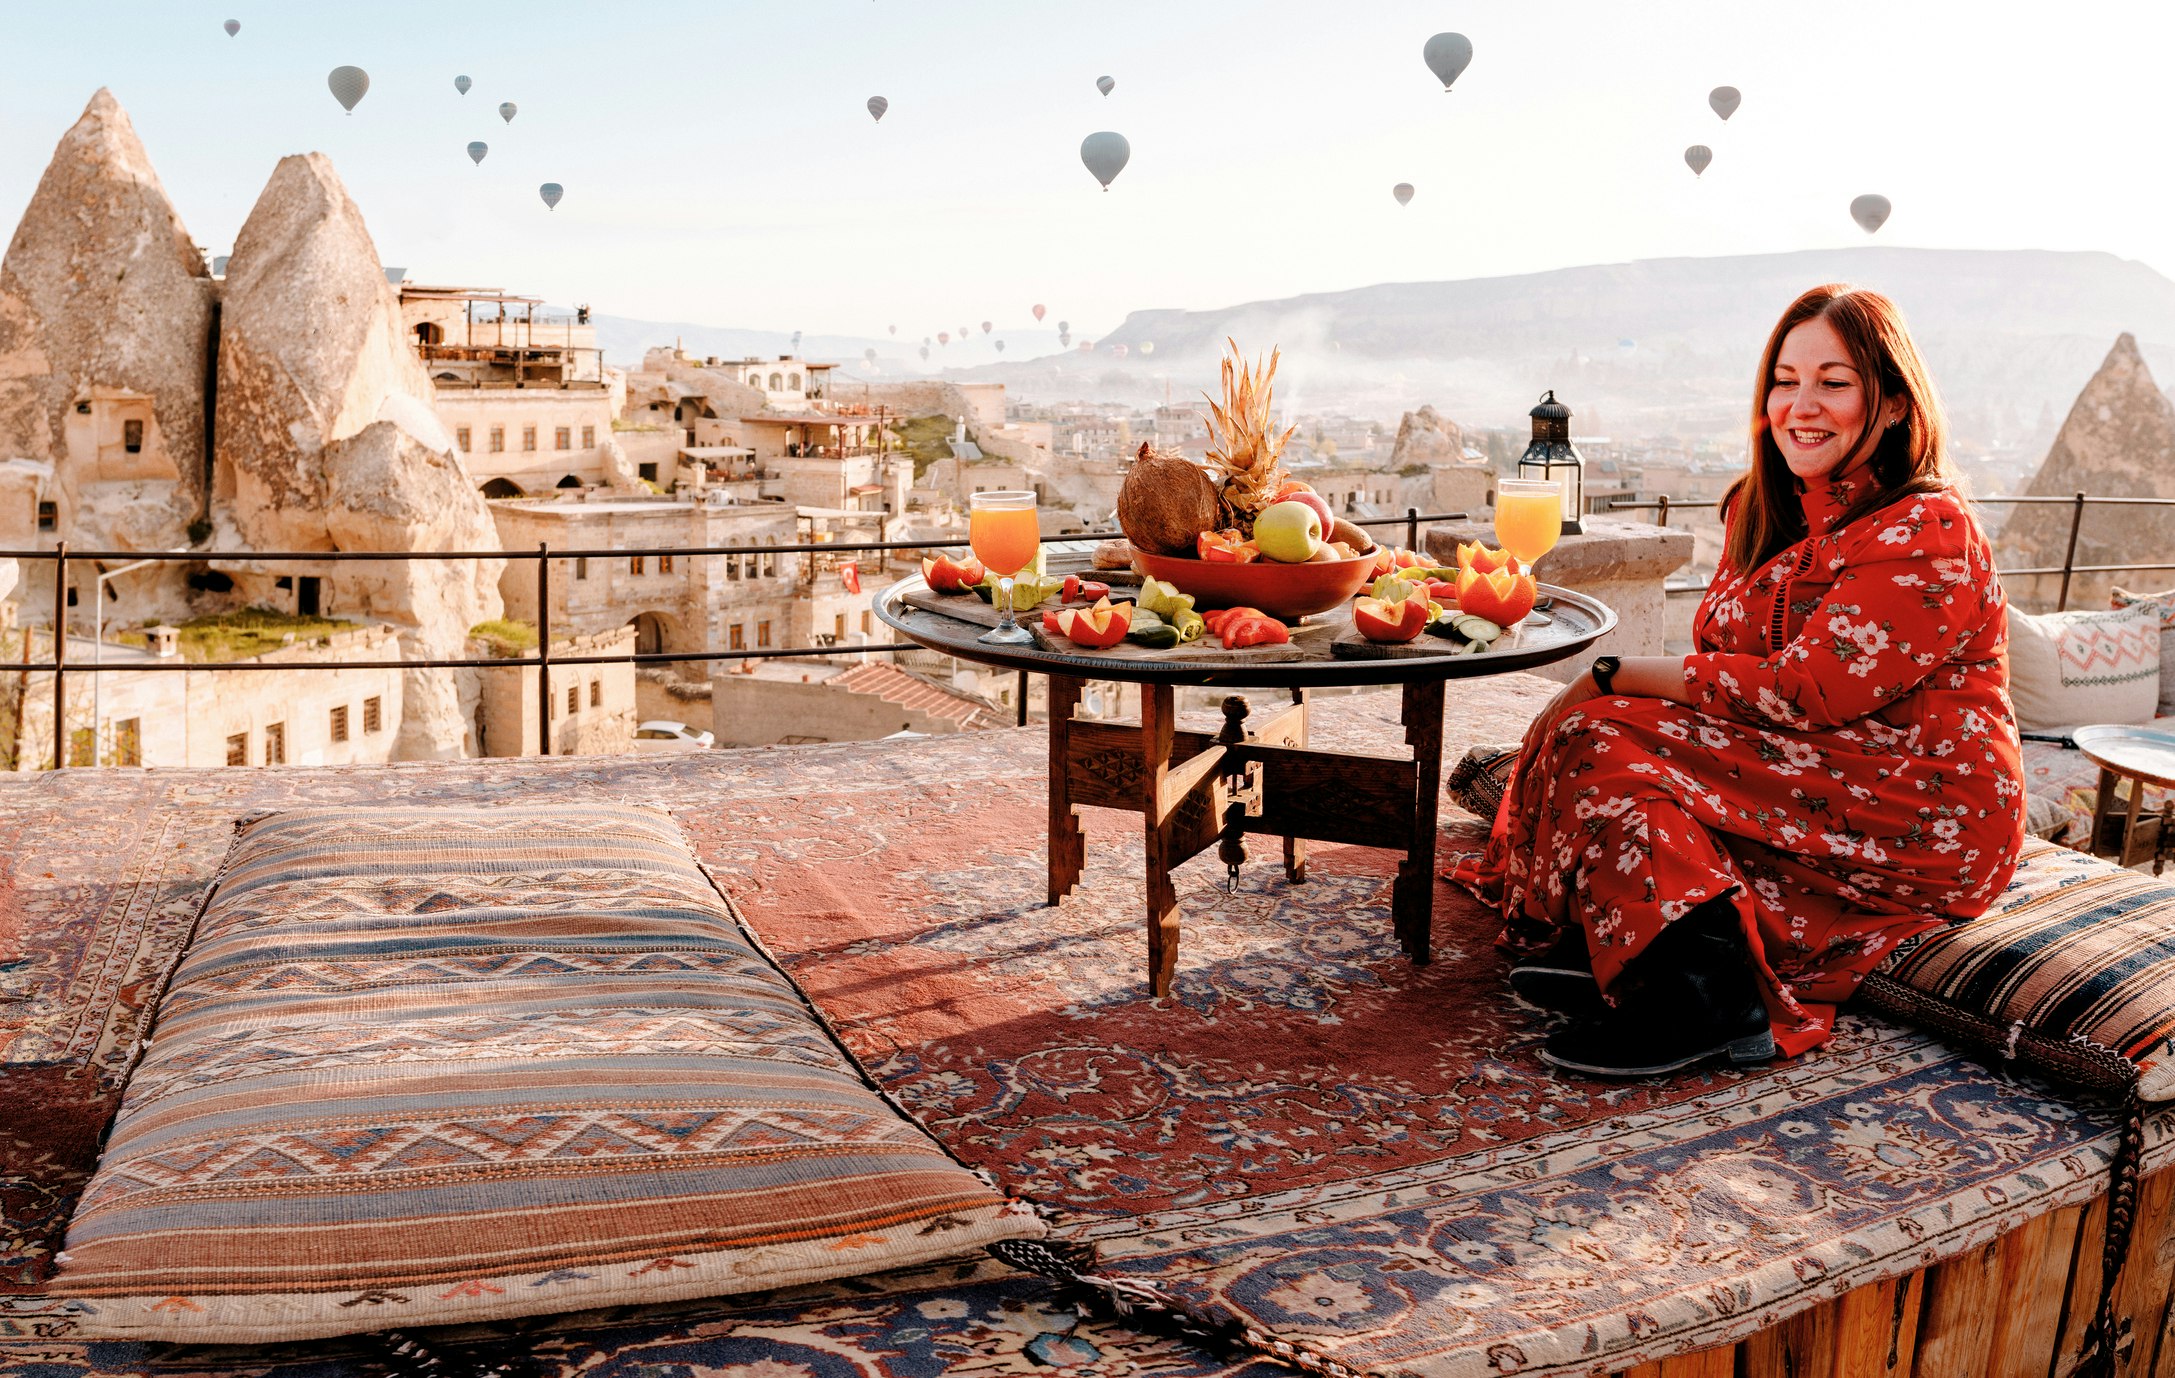 A woman on a hotel rooftop smiles at the beautiful scenery as hot-air-balloons soar in the sky above her